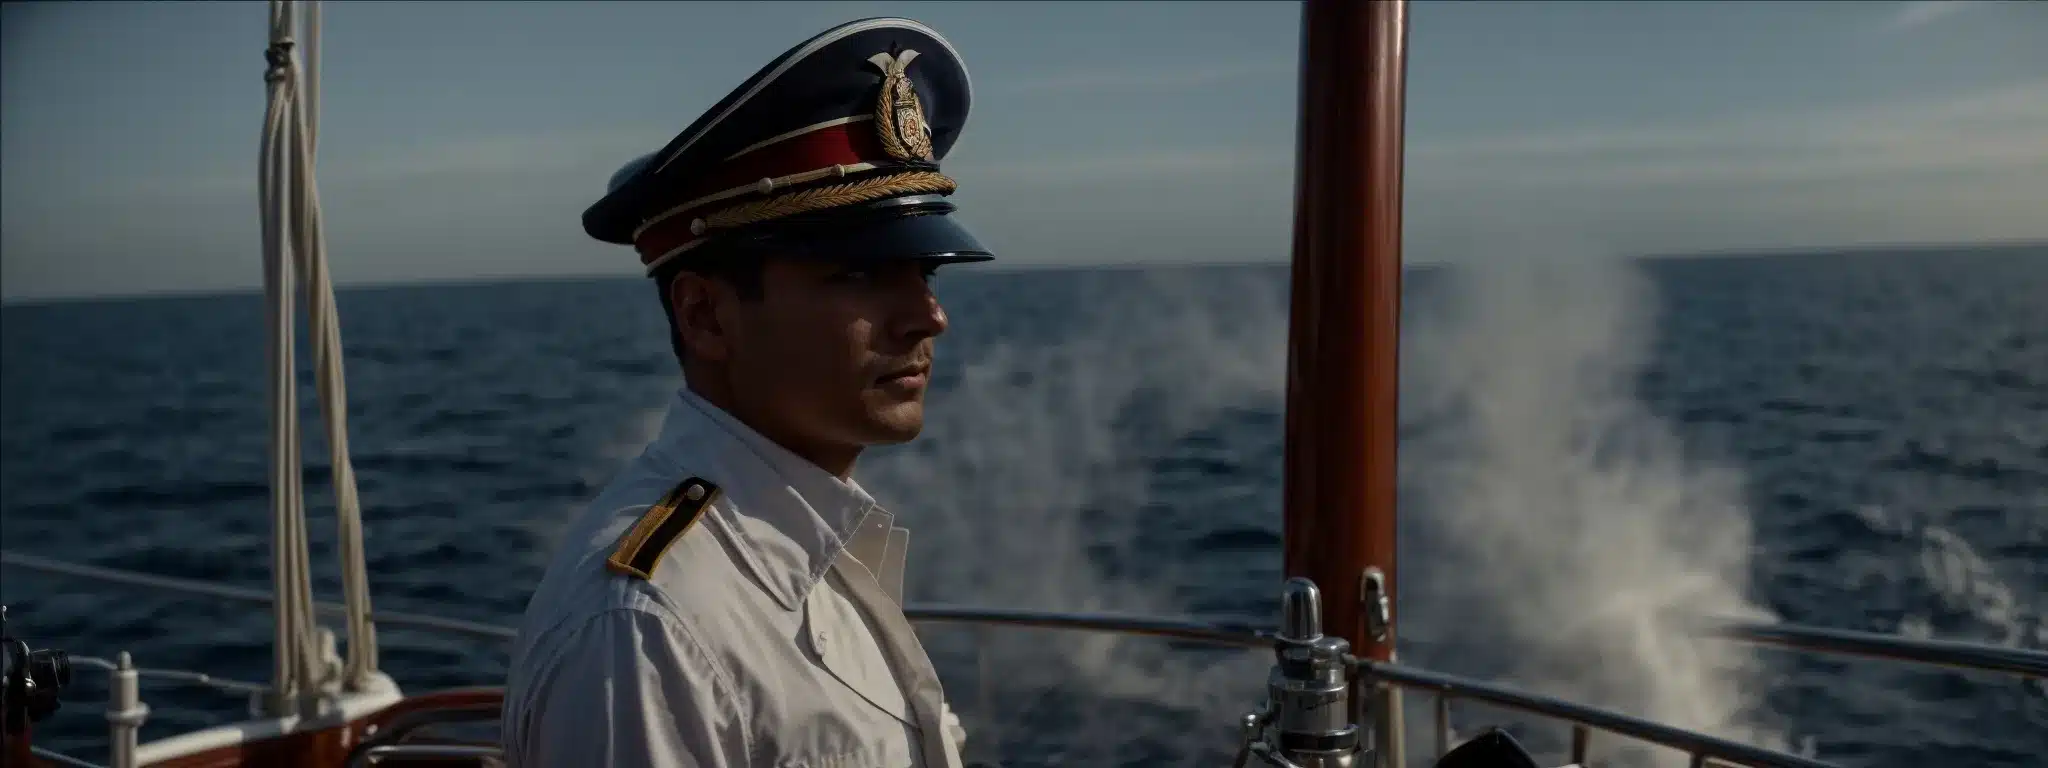 A Captain Standing At The Helm Of A Ship, Looking Out Over A Vast And Open Sea With Binoculars.